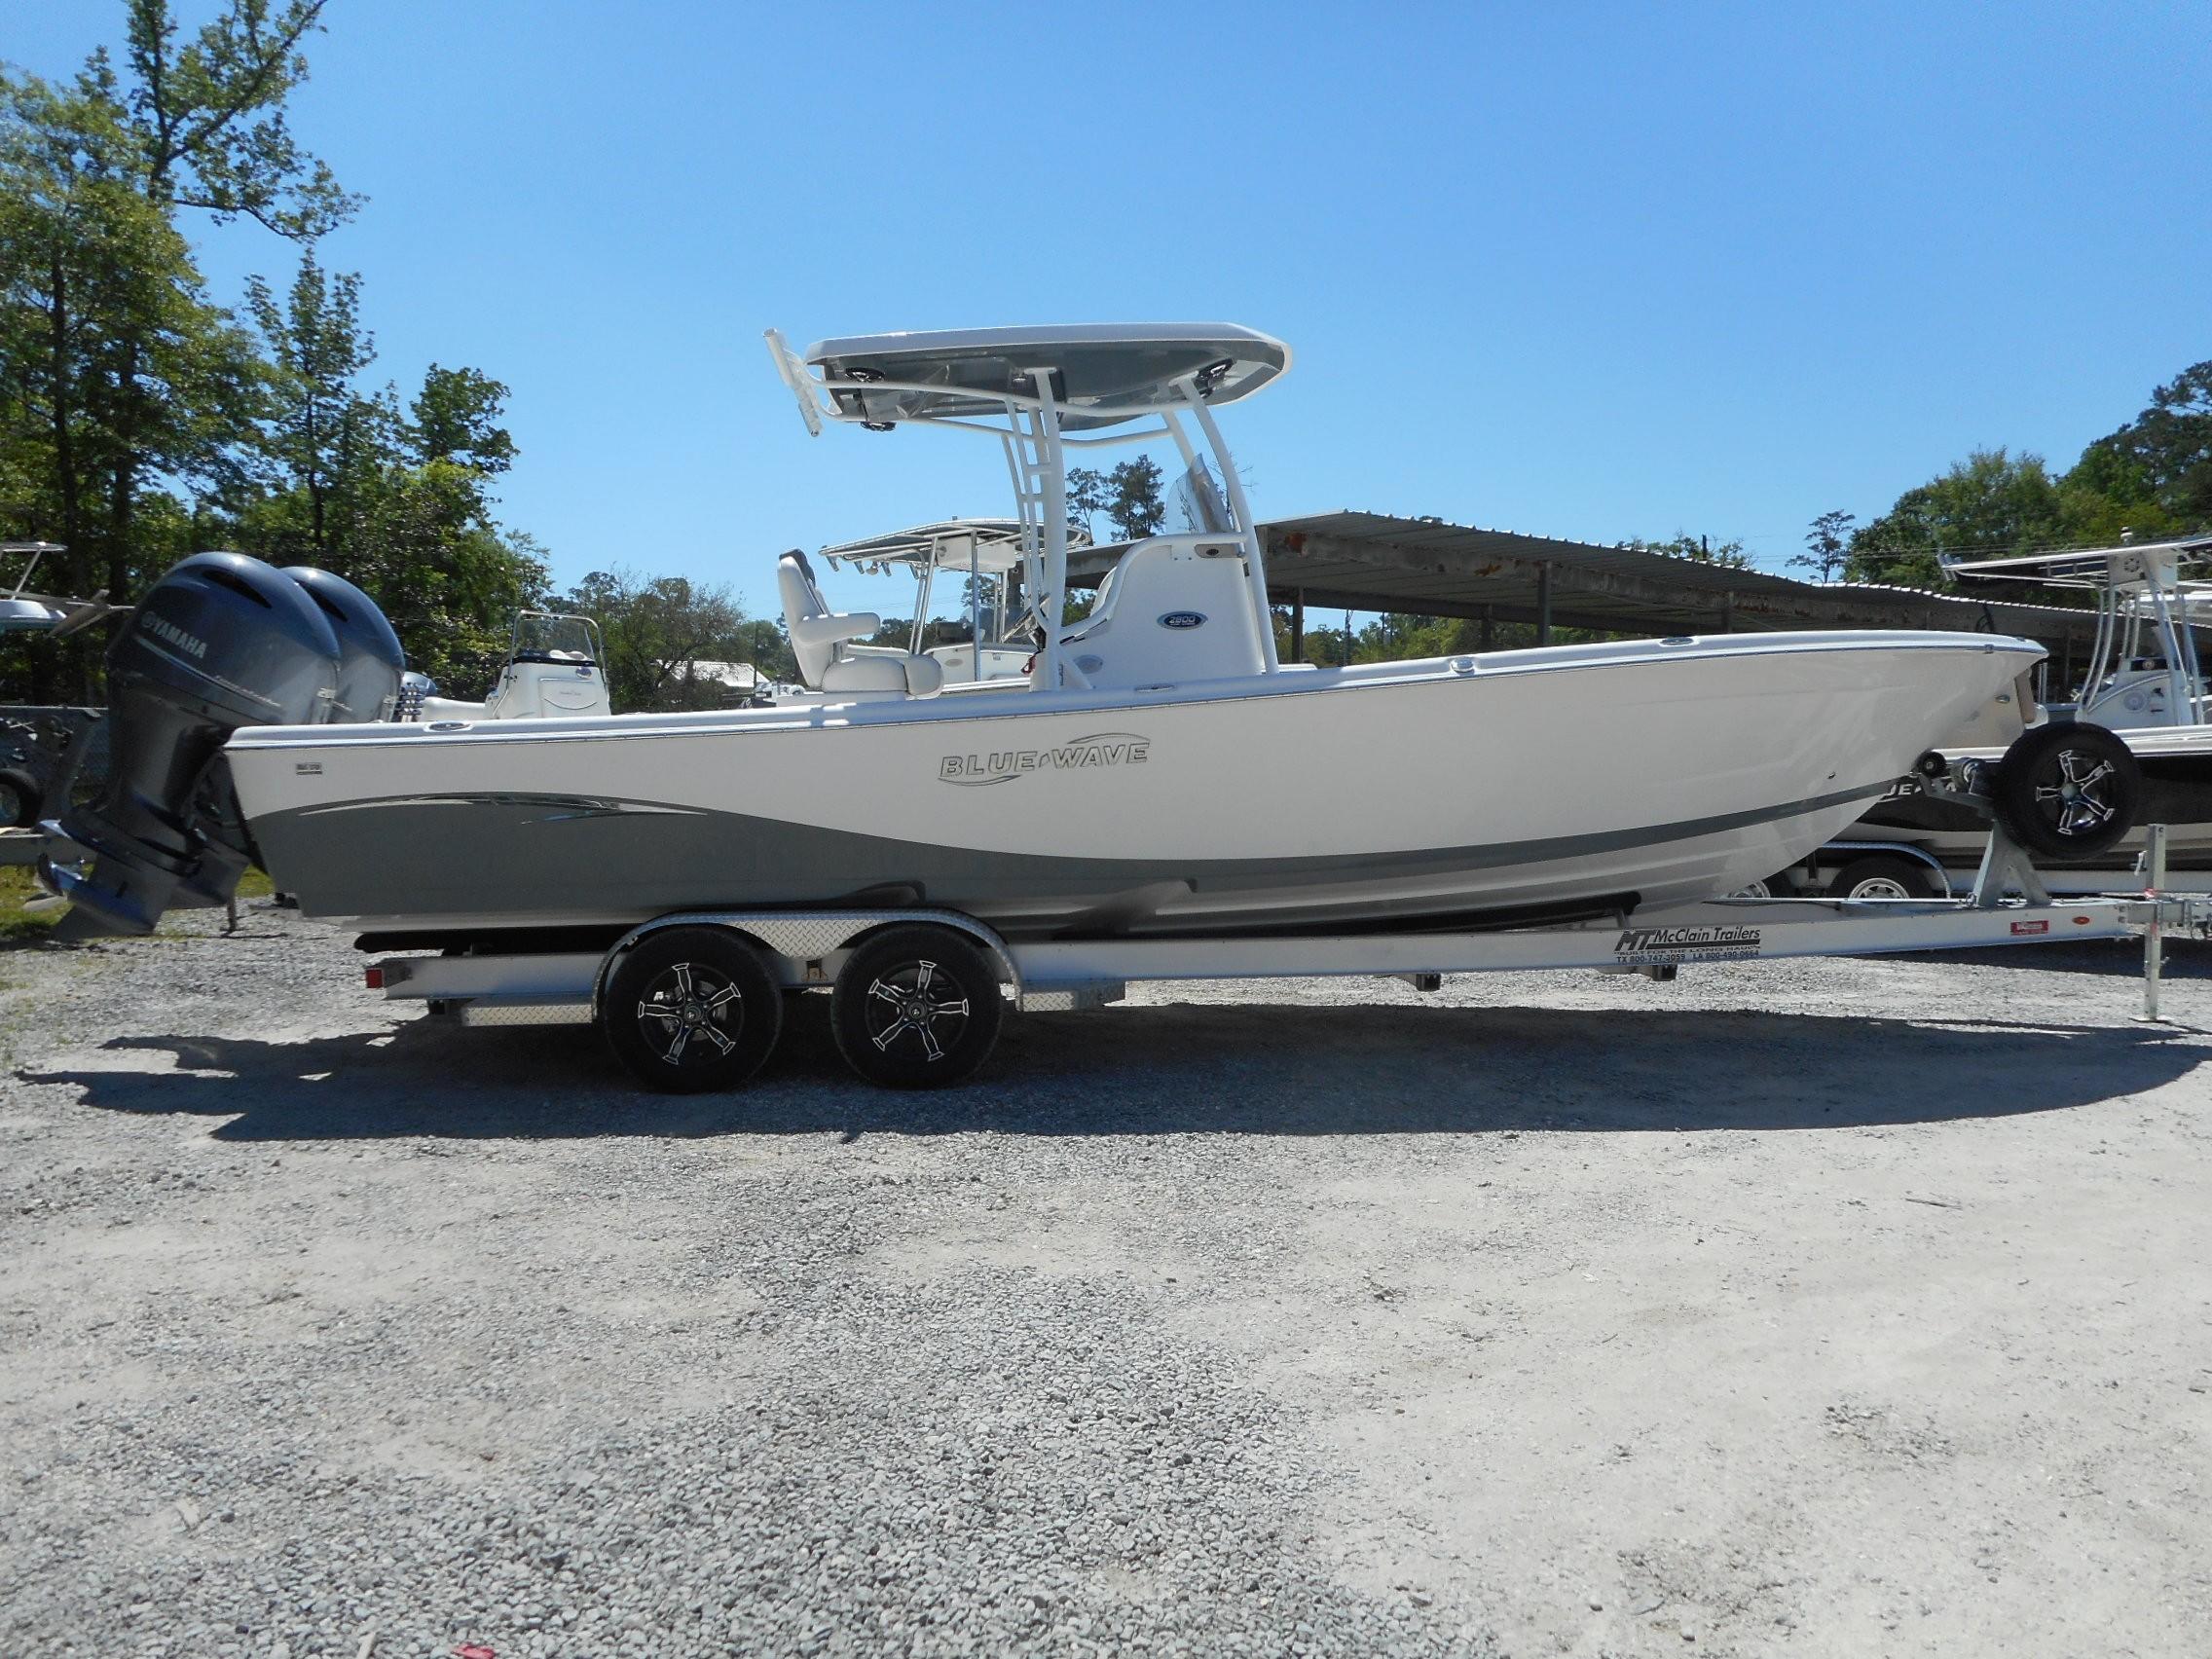 New  2019 27.17' Blue Wave 2800 Pure Hybrid Center Console in Slidell, Louisiana